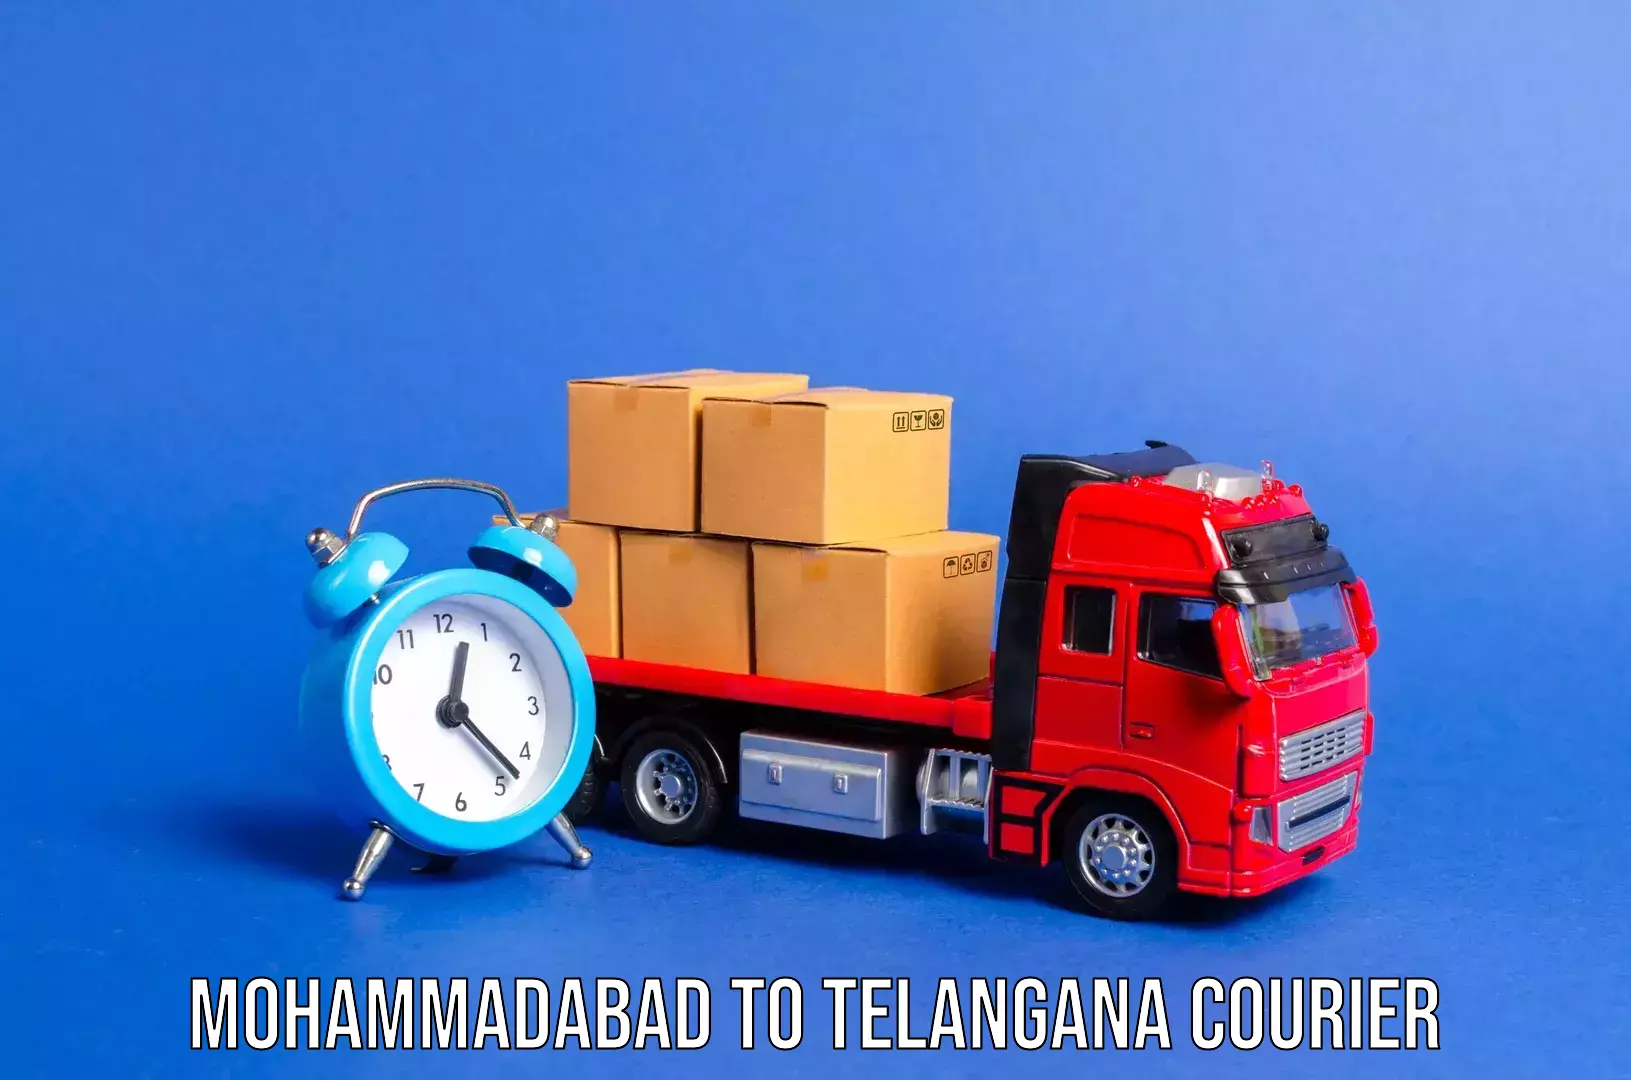 Online luggage shipping booking Mohammadabad to Tallada